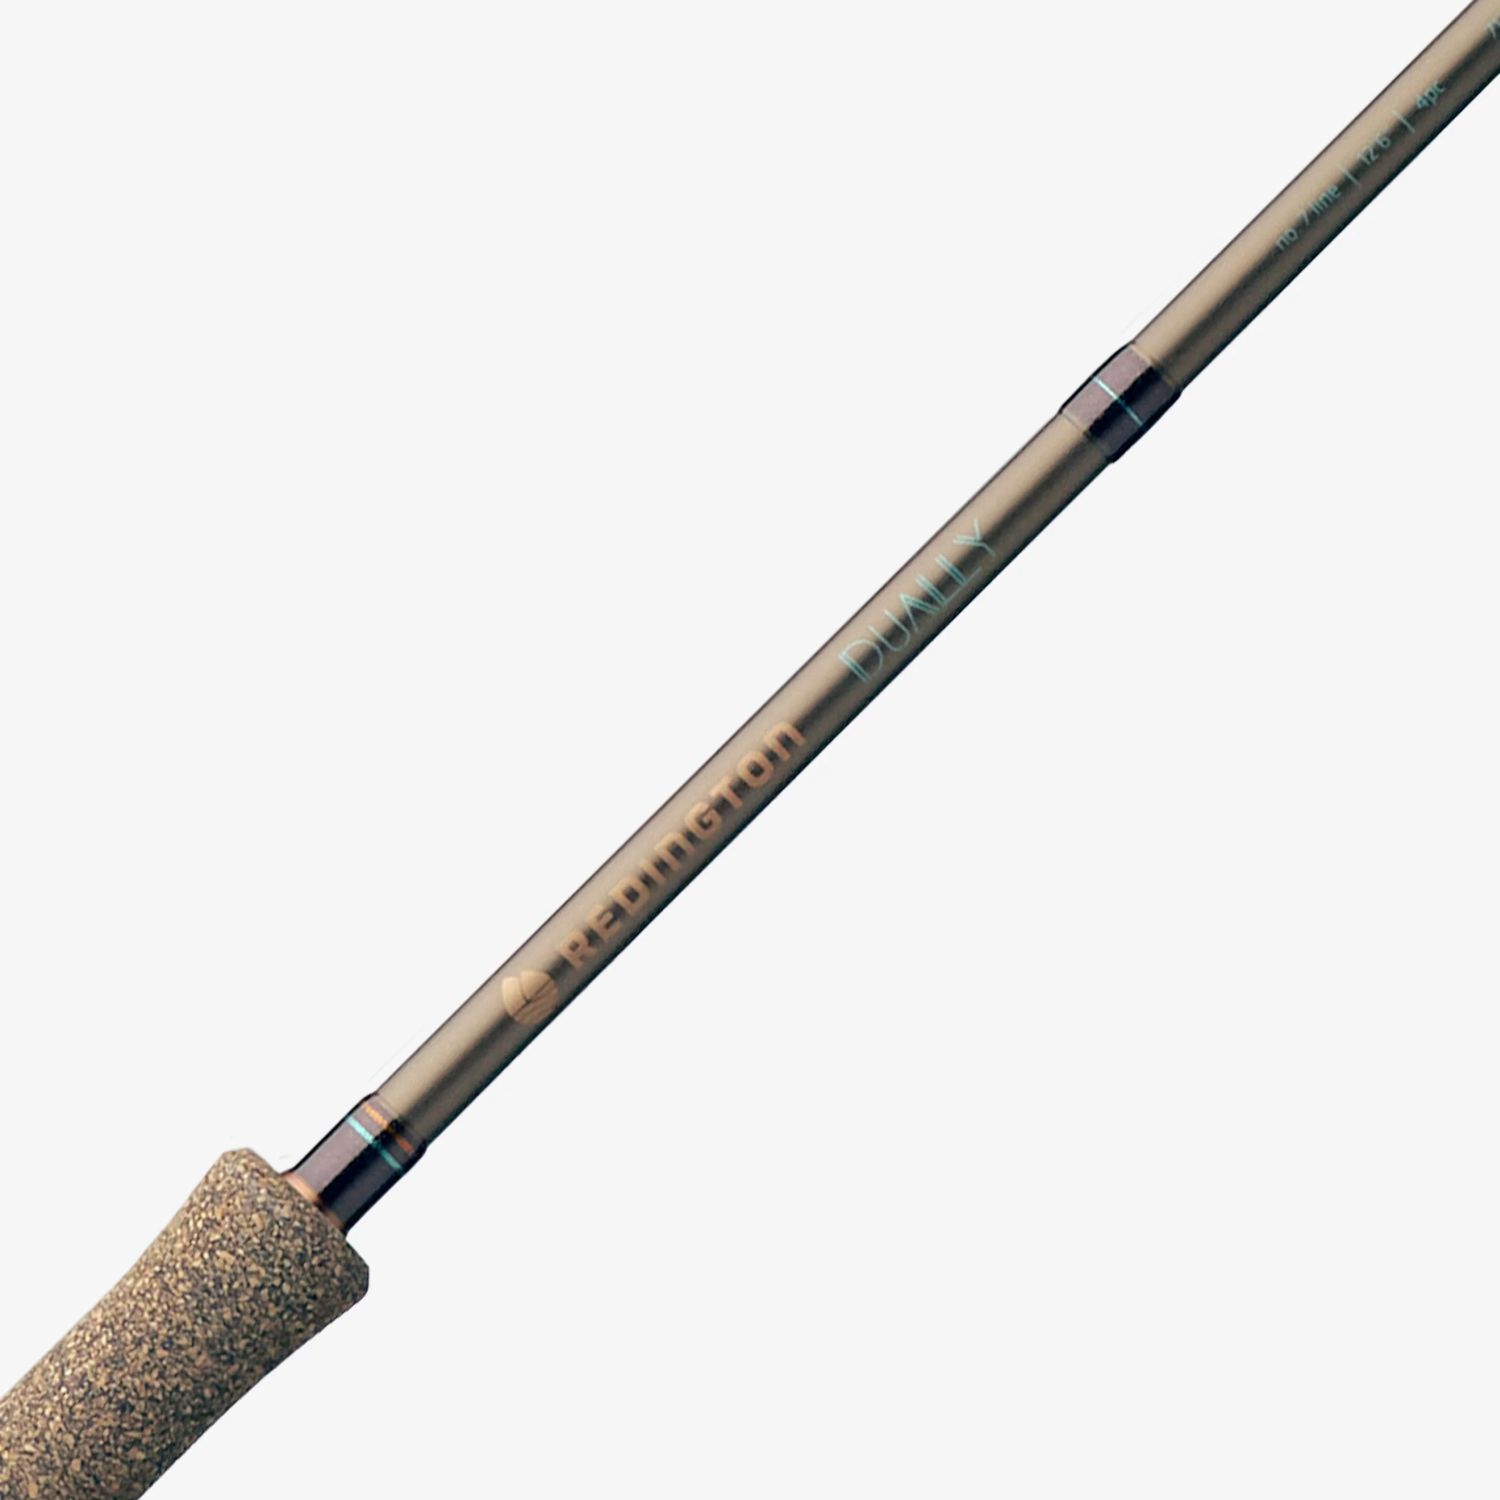 Dually II Fly Rod (Two Handed Spey Rod)